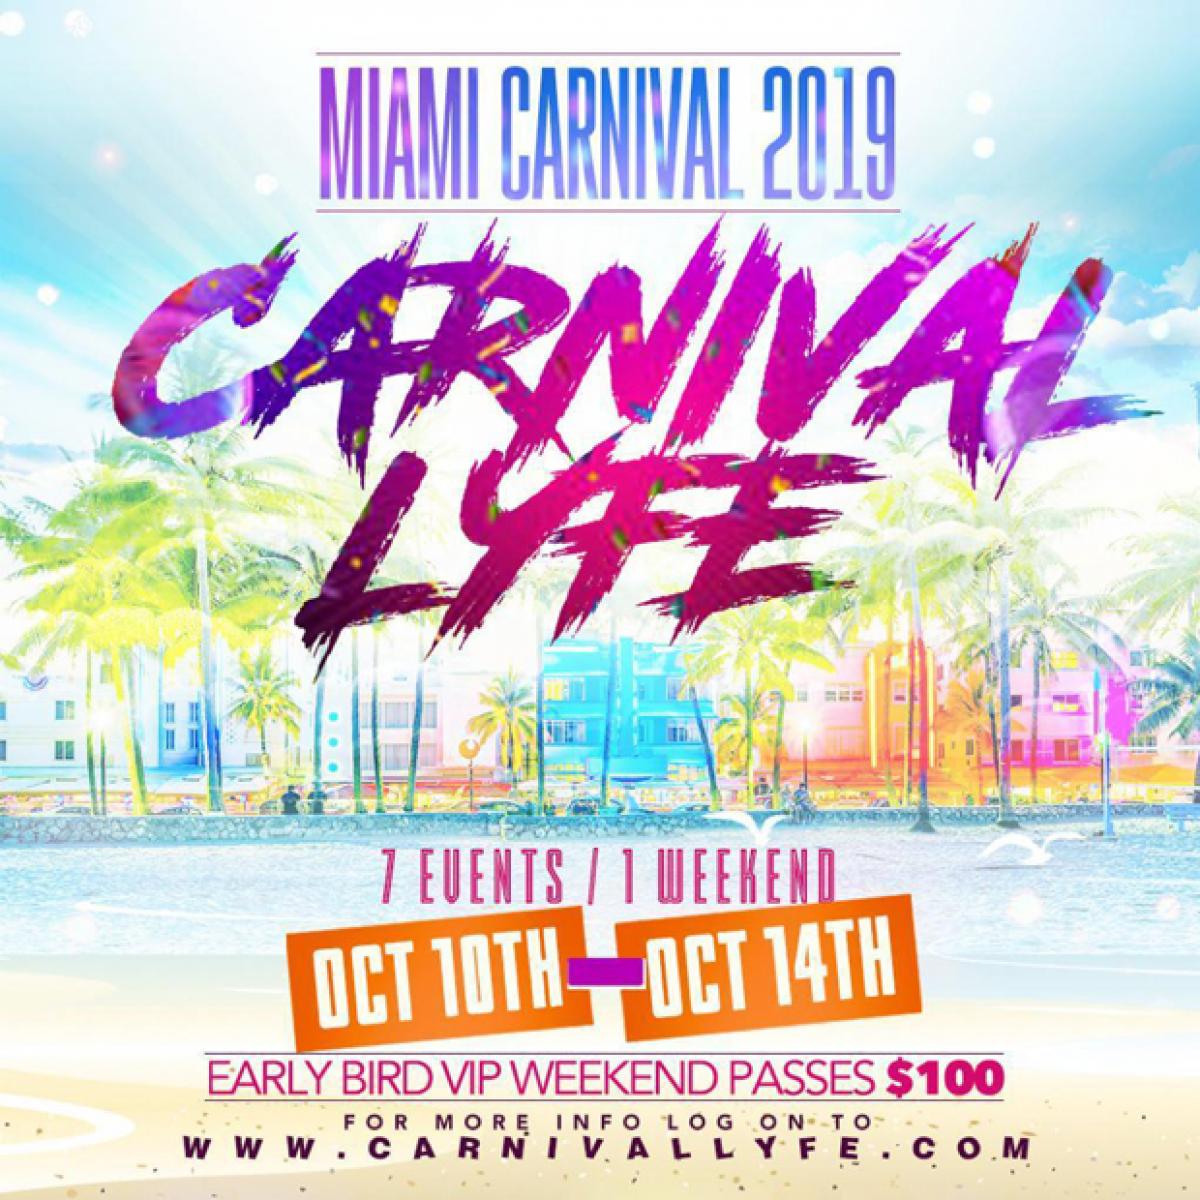 Carnival Lyfe Weekend Passes flyer or main visual.